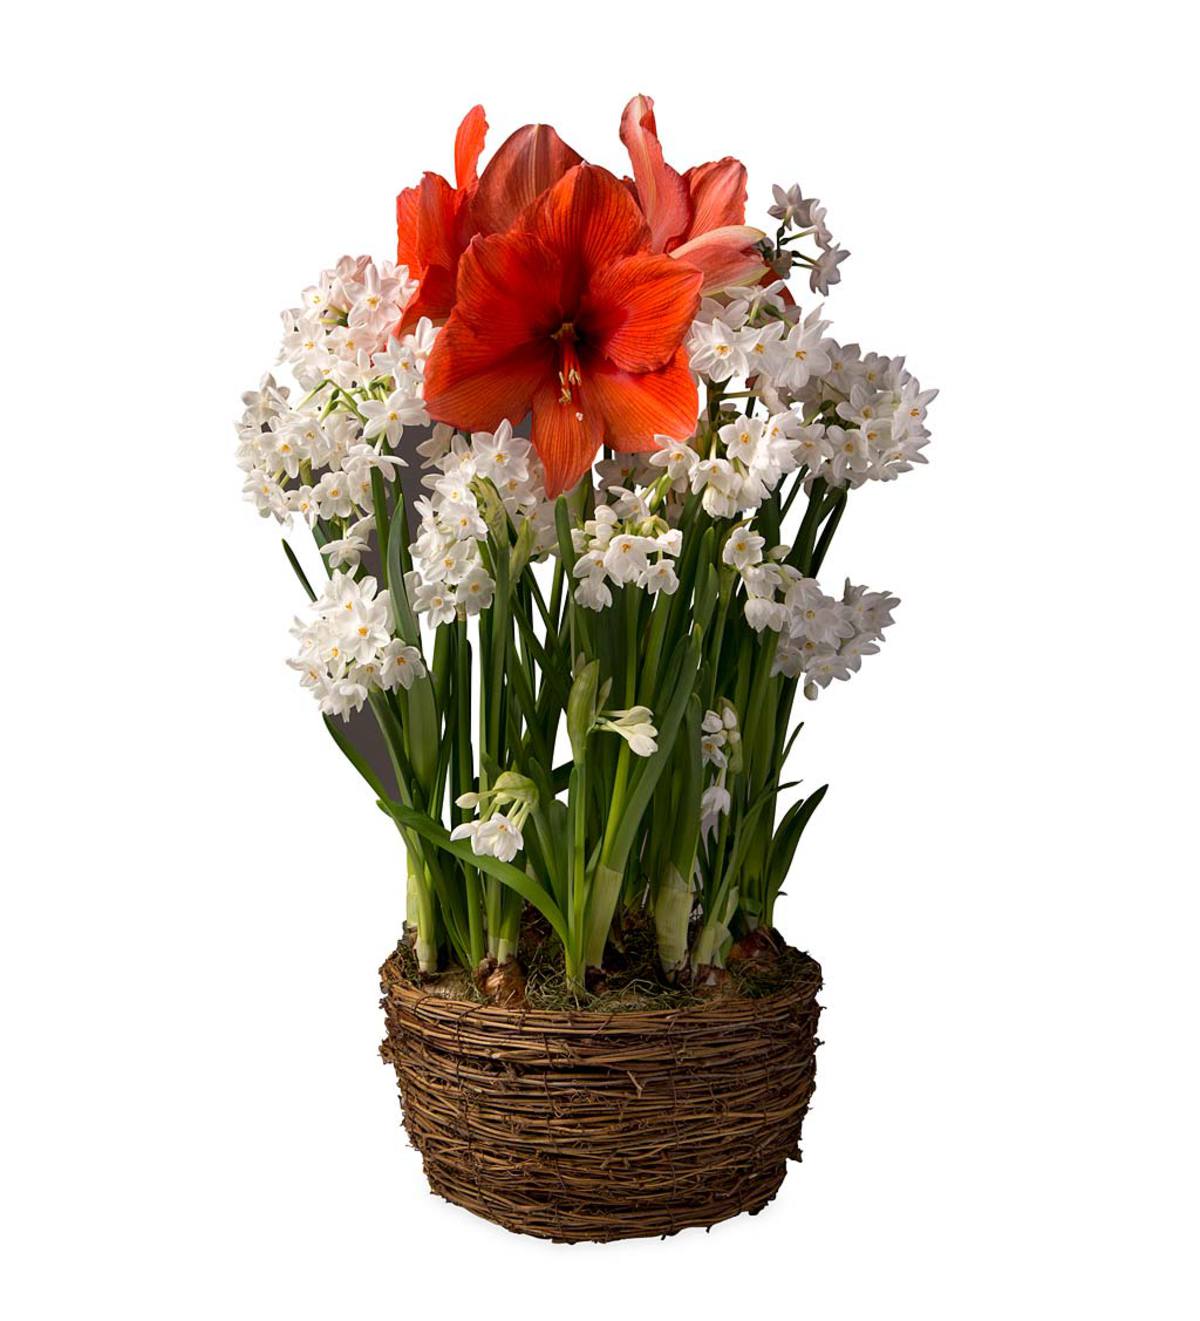 Amaryllis and Narcissus Bulb Garden